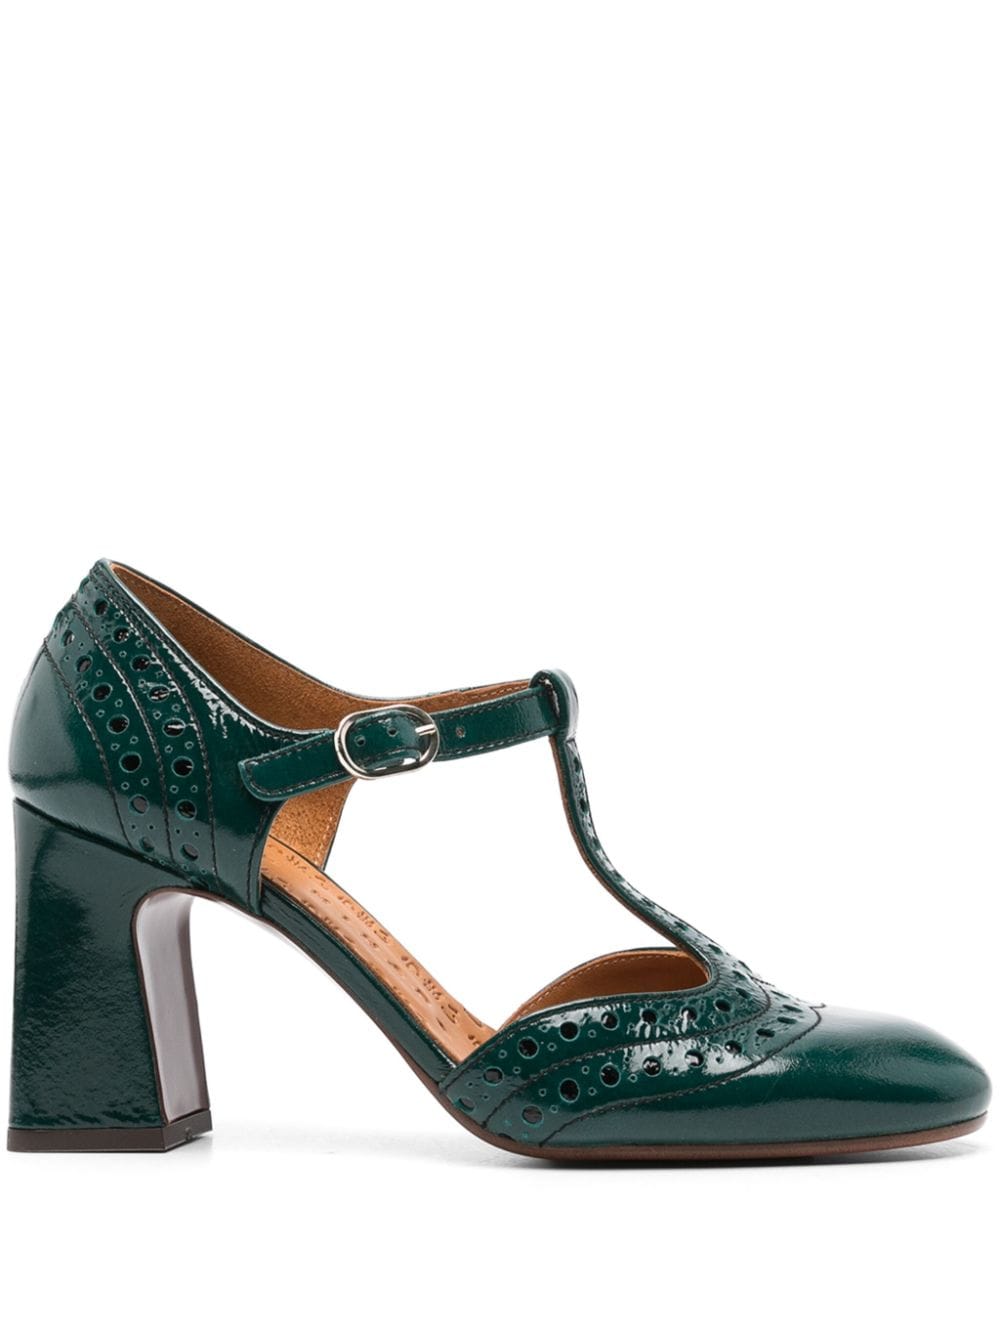 Chie Mihara Mante 70mm leather brogues - Green von Chie Mihara